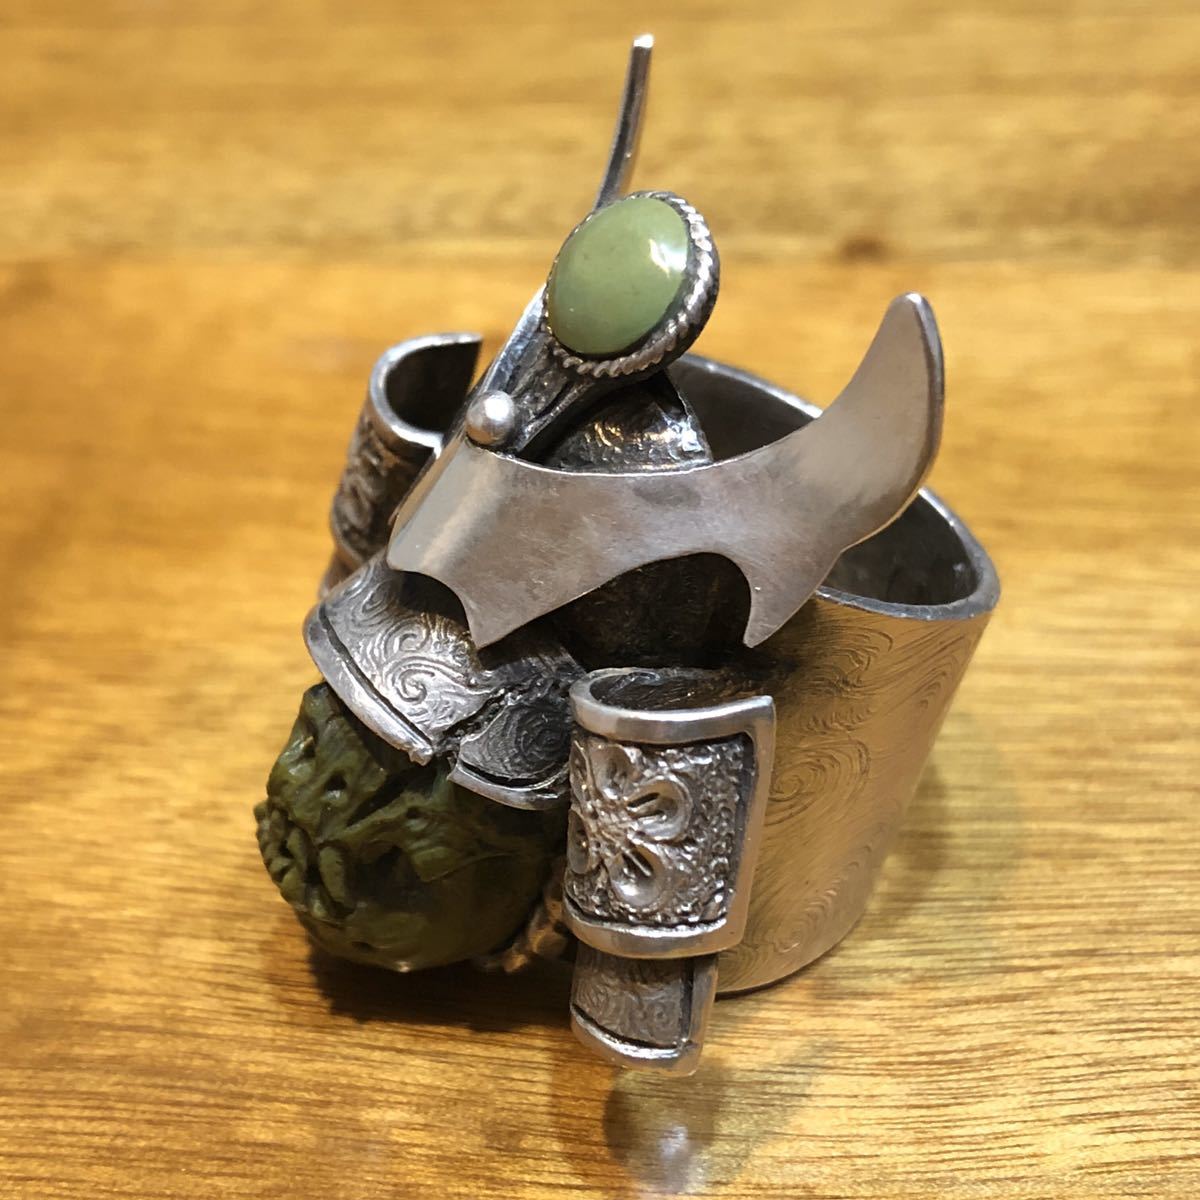 ..CARVEX* made in Japan hand carving one point thing skill Skull ring large samurai 23.5 number sculpture house arm guard kote work original silver silver + turquoise hand made engraving ring .. skeleton 